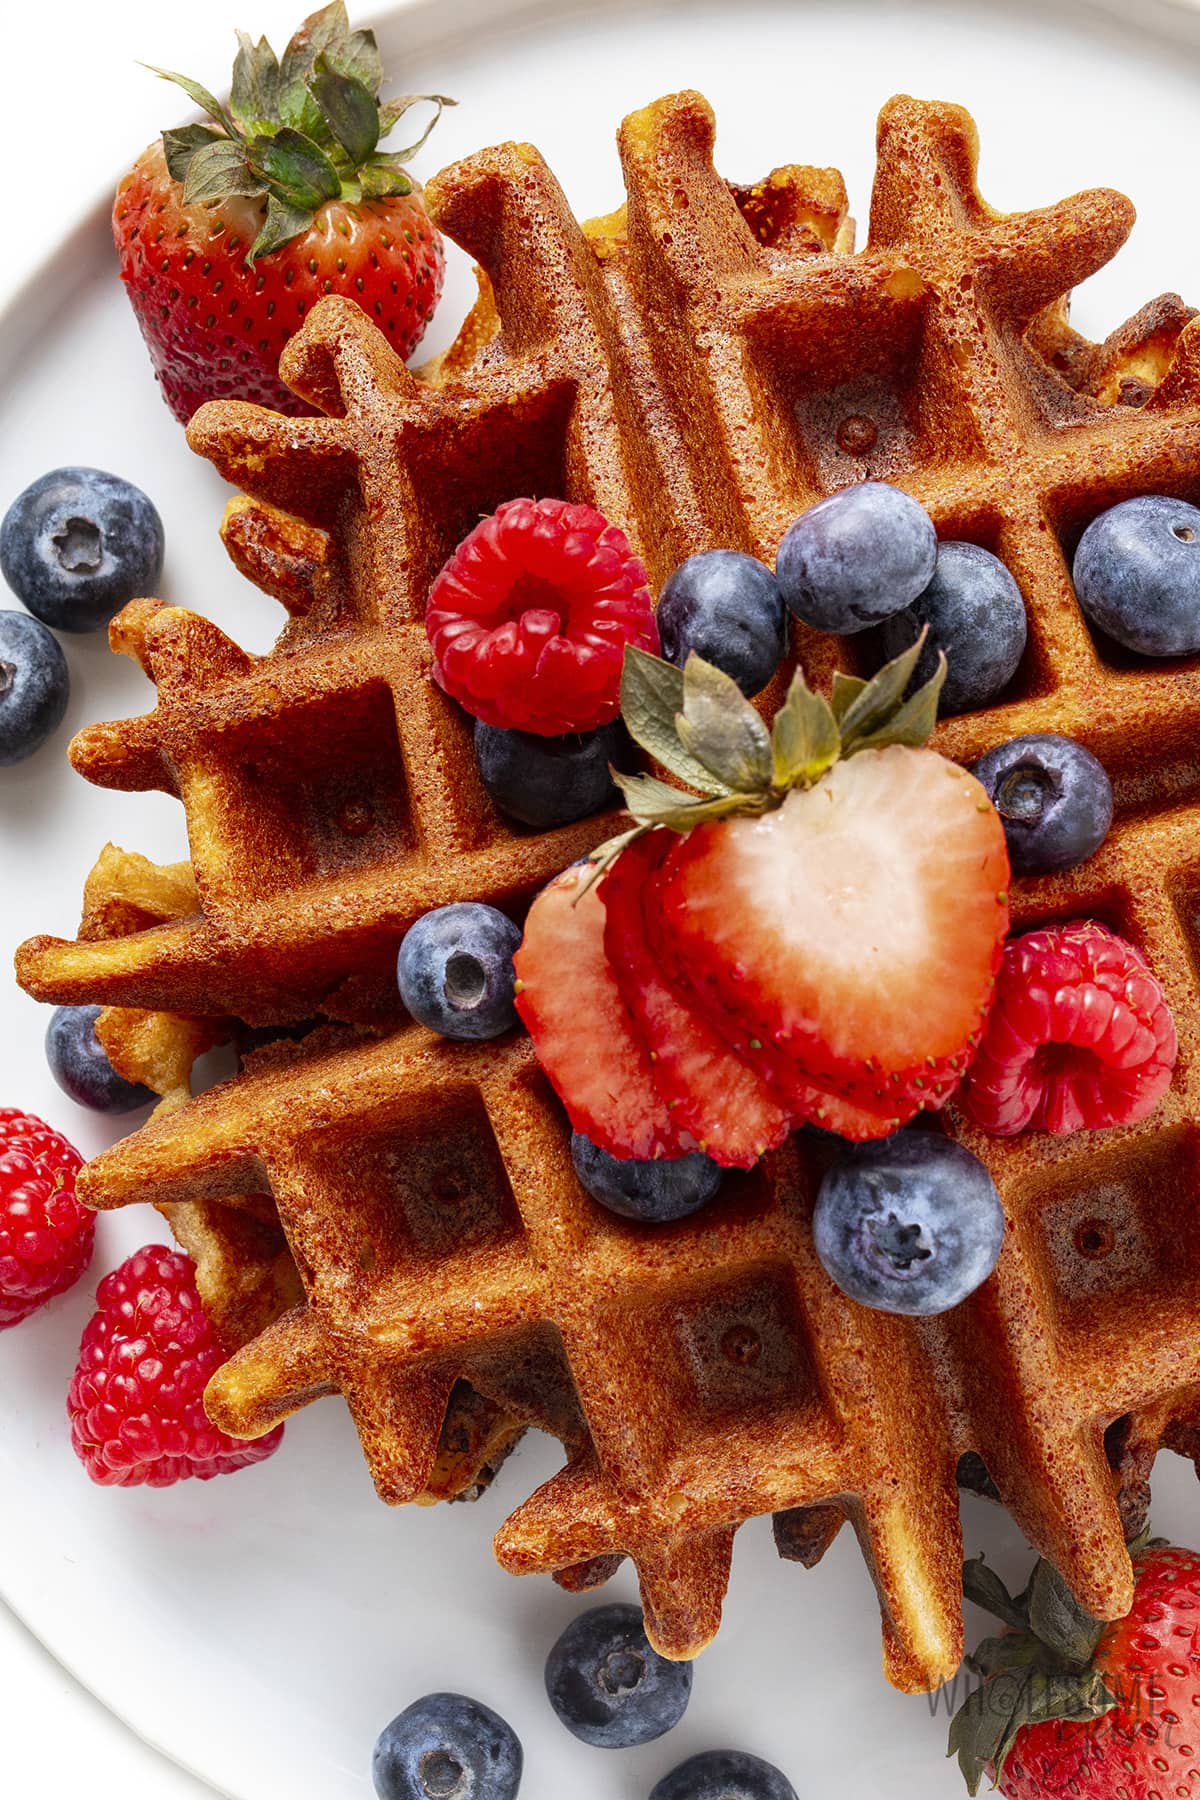 Keto waffle recipe with berries on top